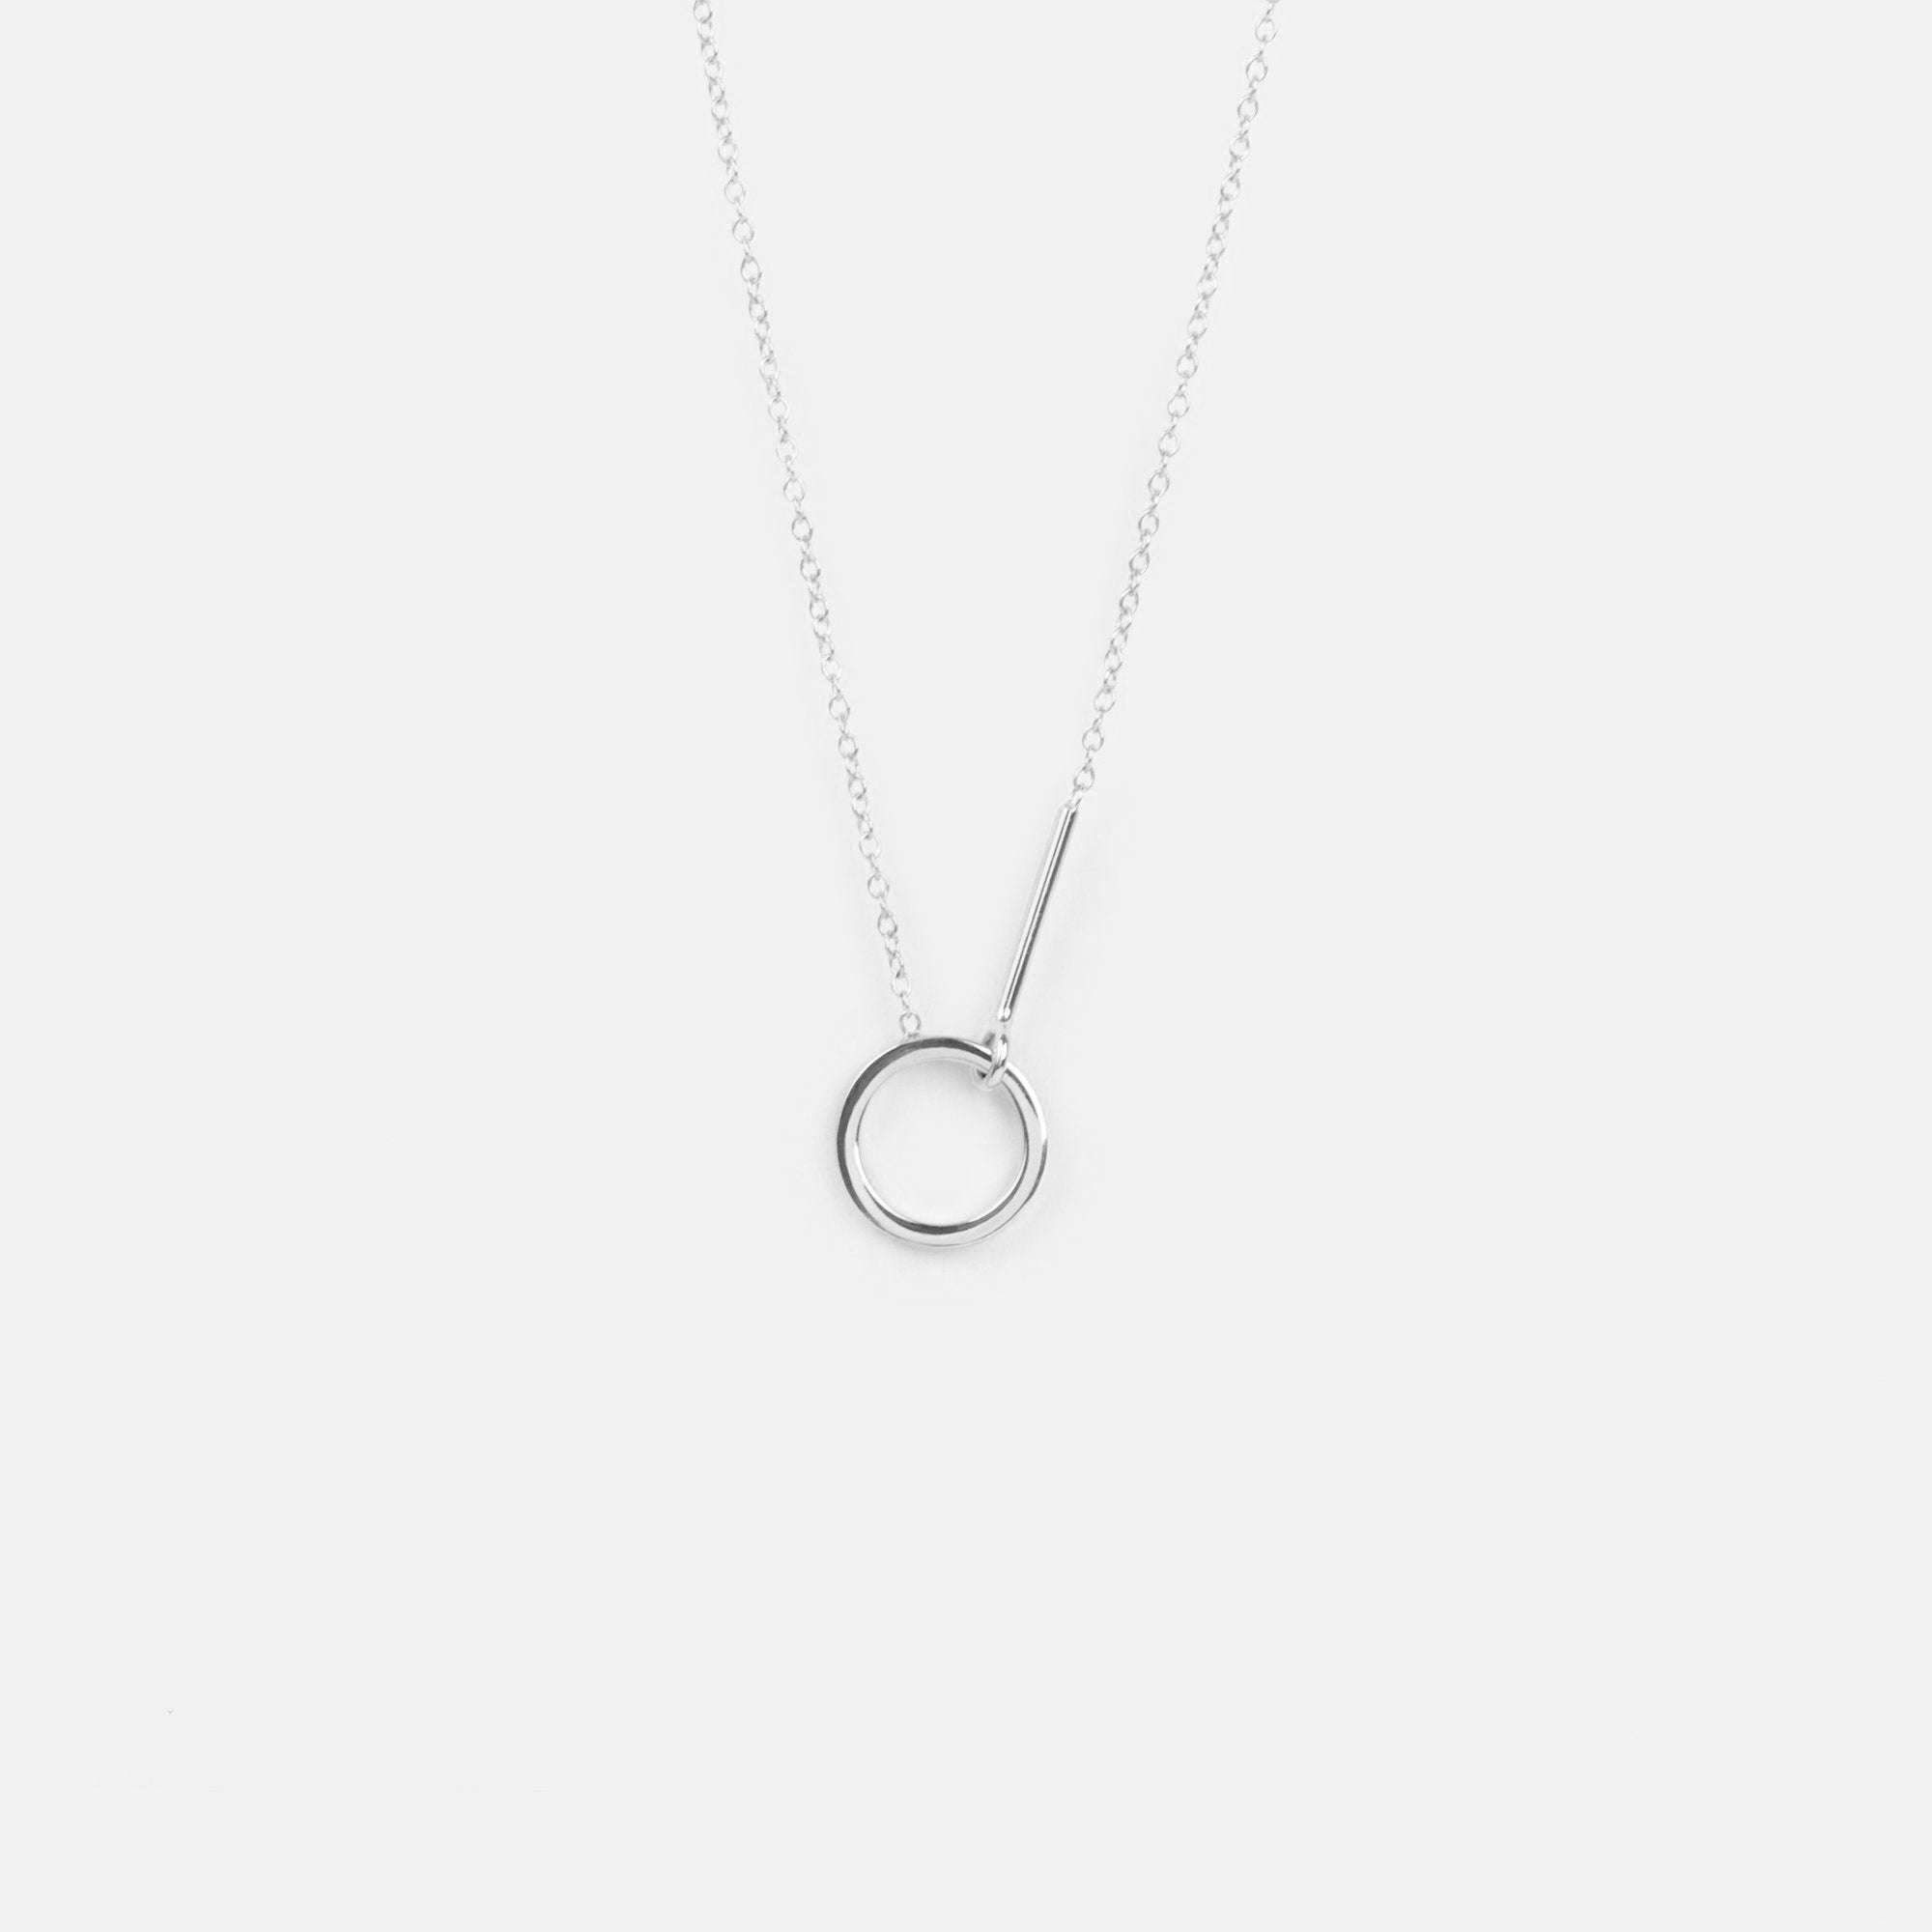 Visata Alternative Necklace in Sterling Silver By SHW Fine Jewelry NYC